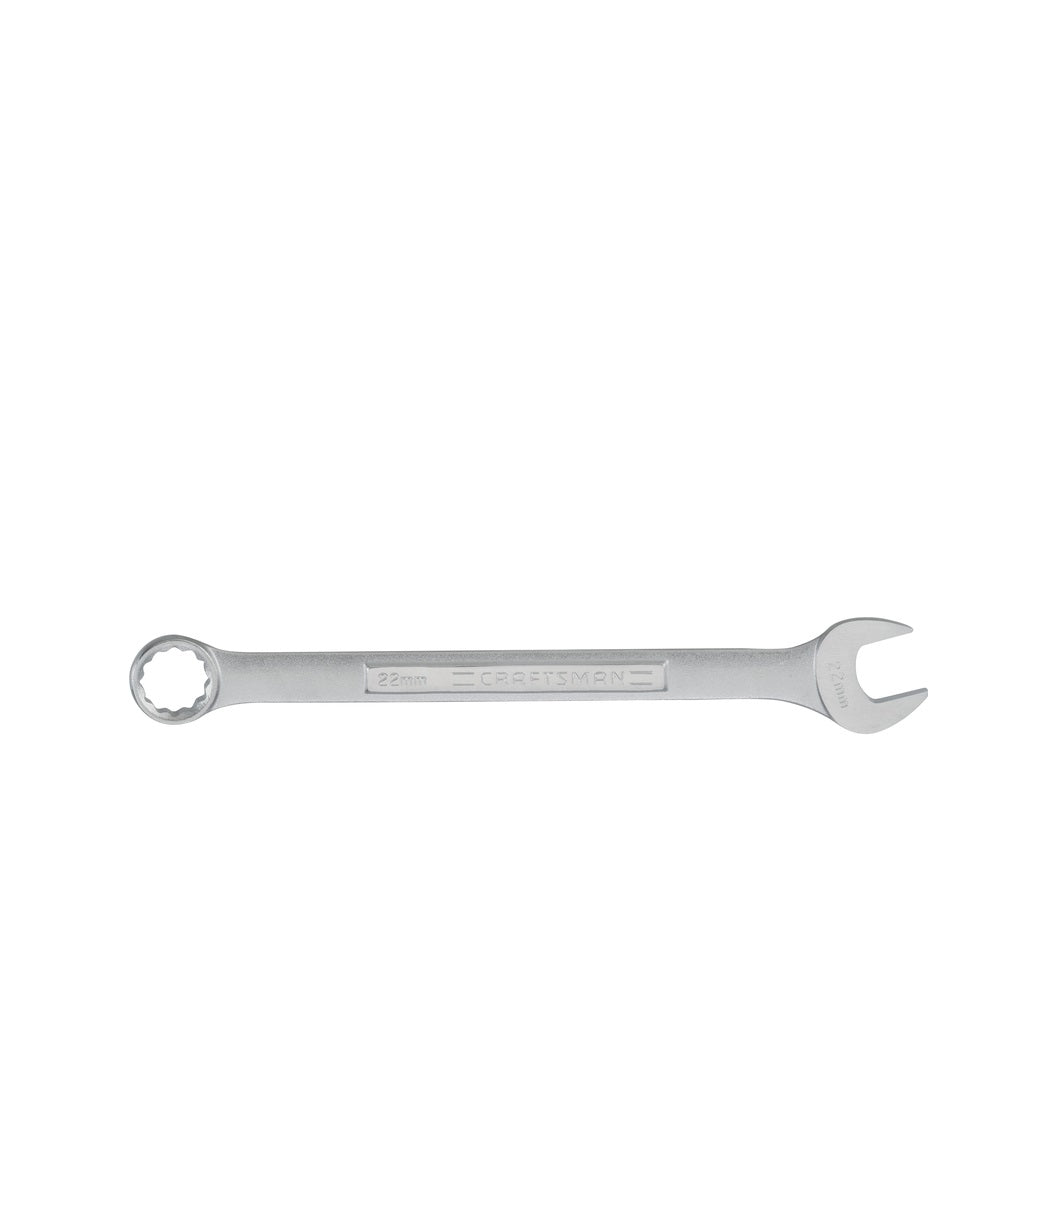 Craftsman CMMT42922 12 Point Metric Combination Wrench, 22mm